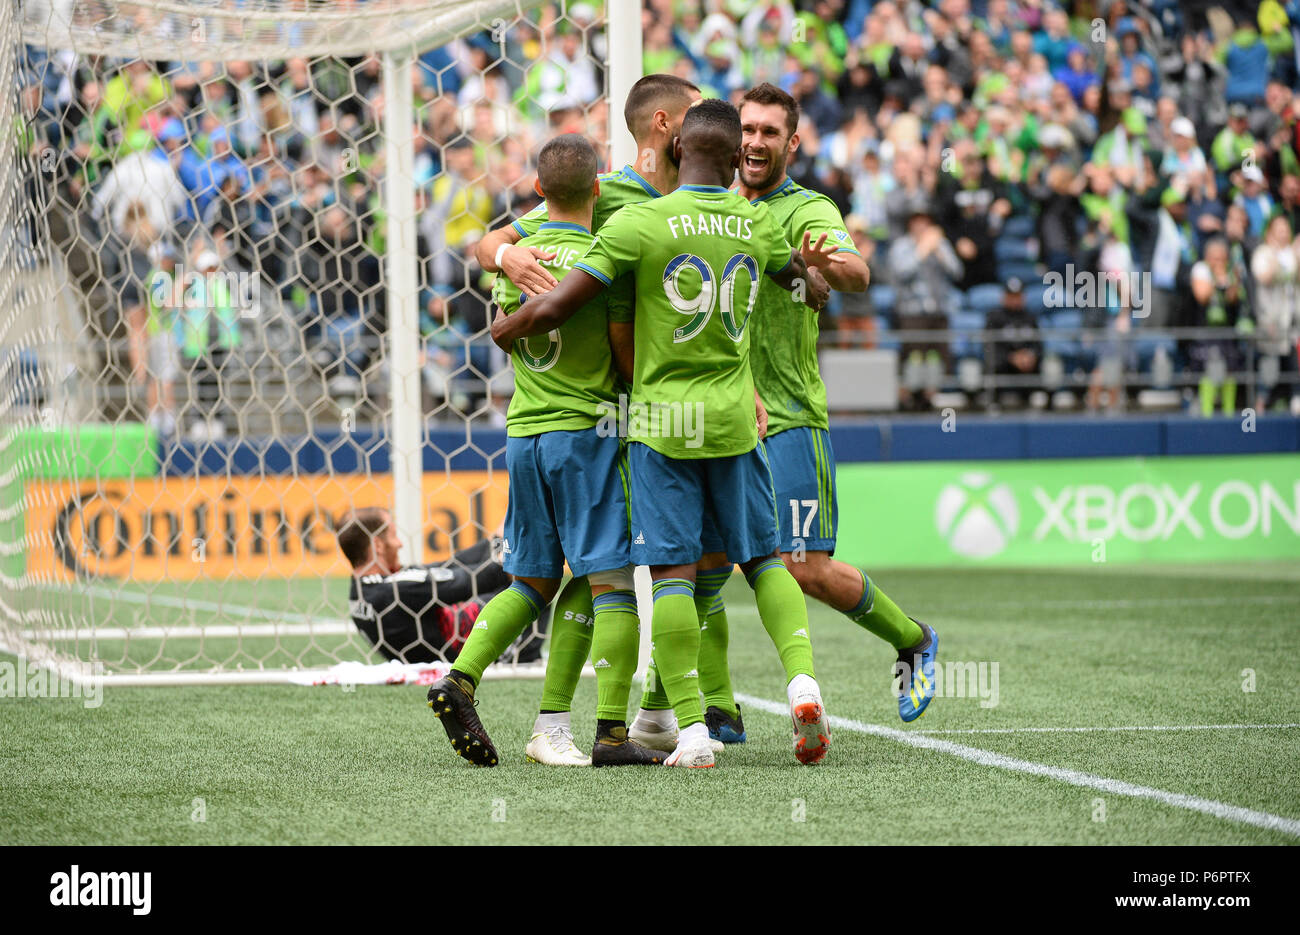 Seattle, Washington, USA. 30th June, 2018. The Sounders VICTOR RODRIGUEZ (8) celebrates his first goal of the season with WILL BRUIN (17), CLINT DEMPSEY (2) and WAYLON FRANCIS (90) as the Portland Timbers play the Seattle Sounders in a Western Conference match at Century Link Field in Seattle, WA. Credit: Jeff Halstead/ZUMA Wire/Alamy Live News Stock Photo